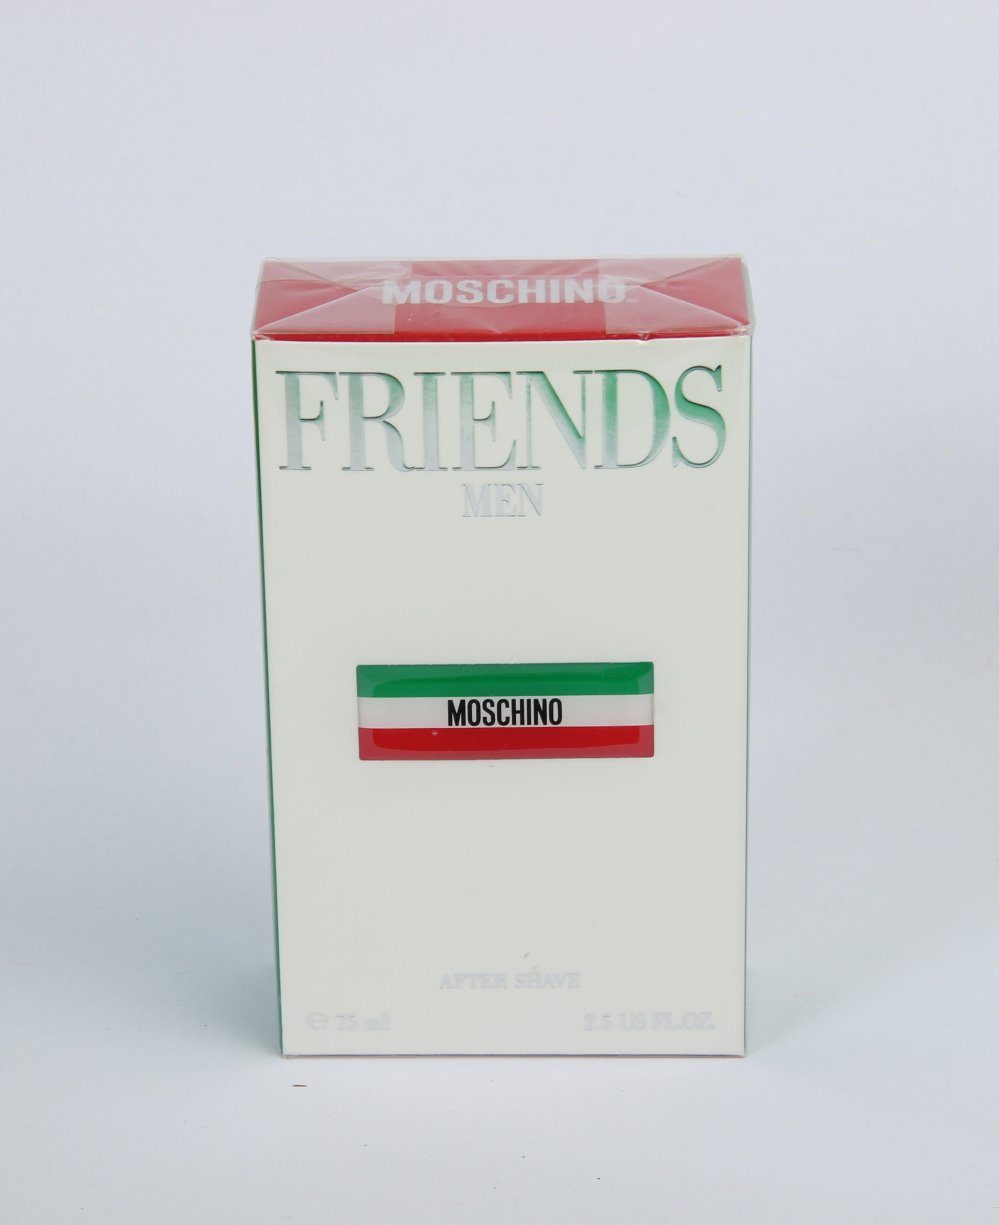 Moschino After Shave Lotion Moschino Friends Man Men After Shave Lotion ...